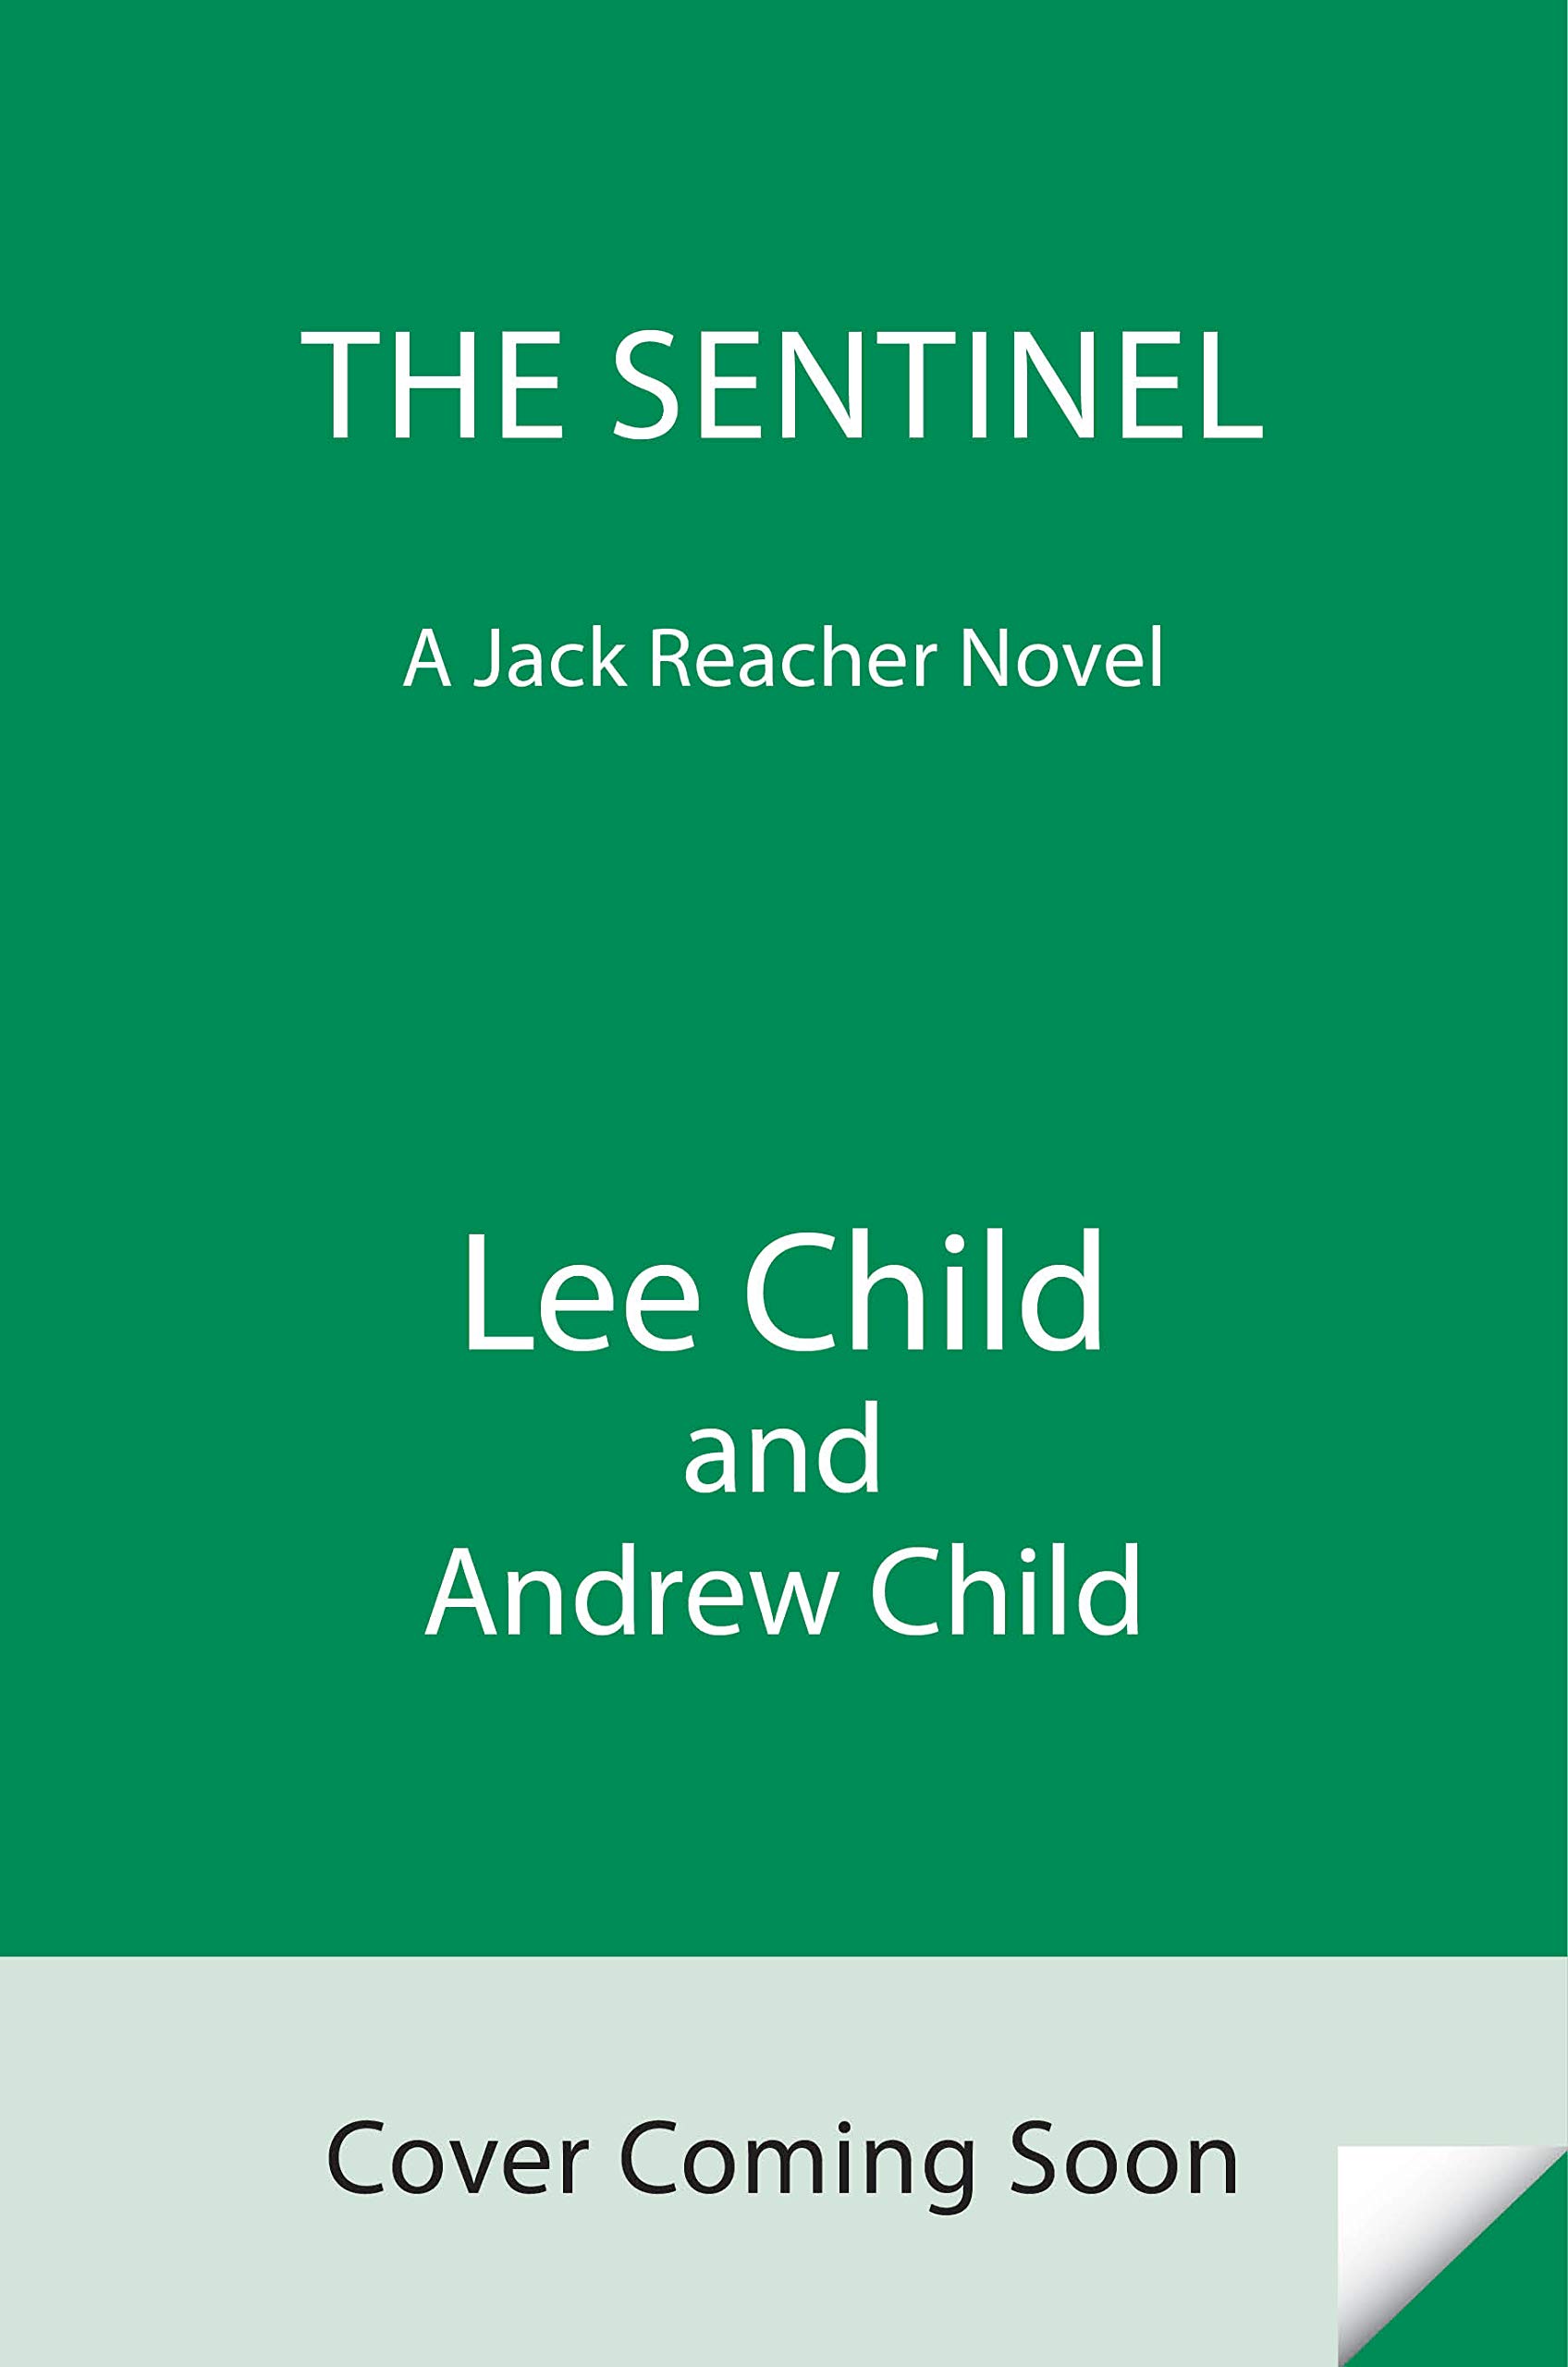 When Does The Sentinel: A Jack Reacher Novel Come Out? Lee Child New